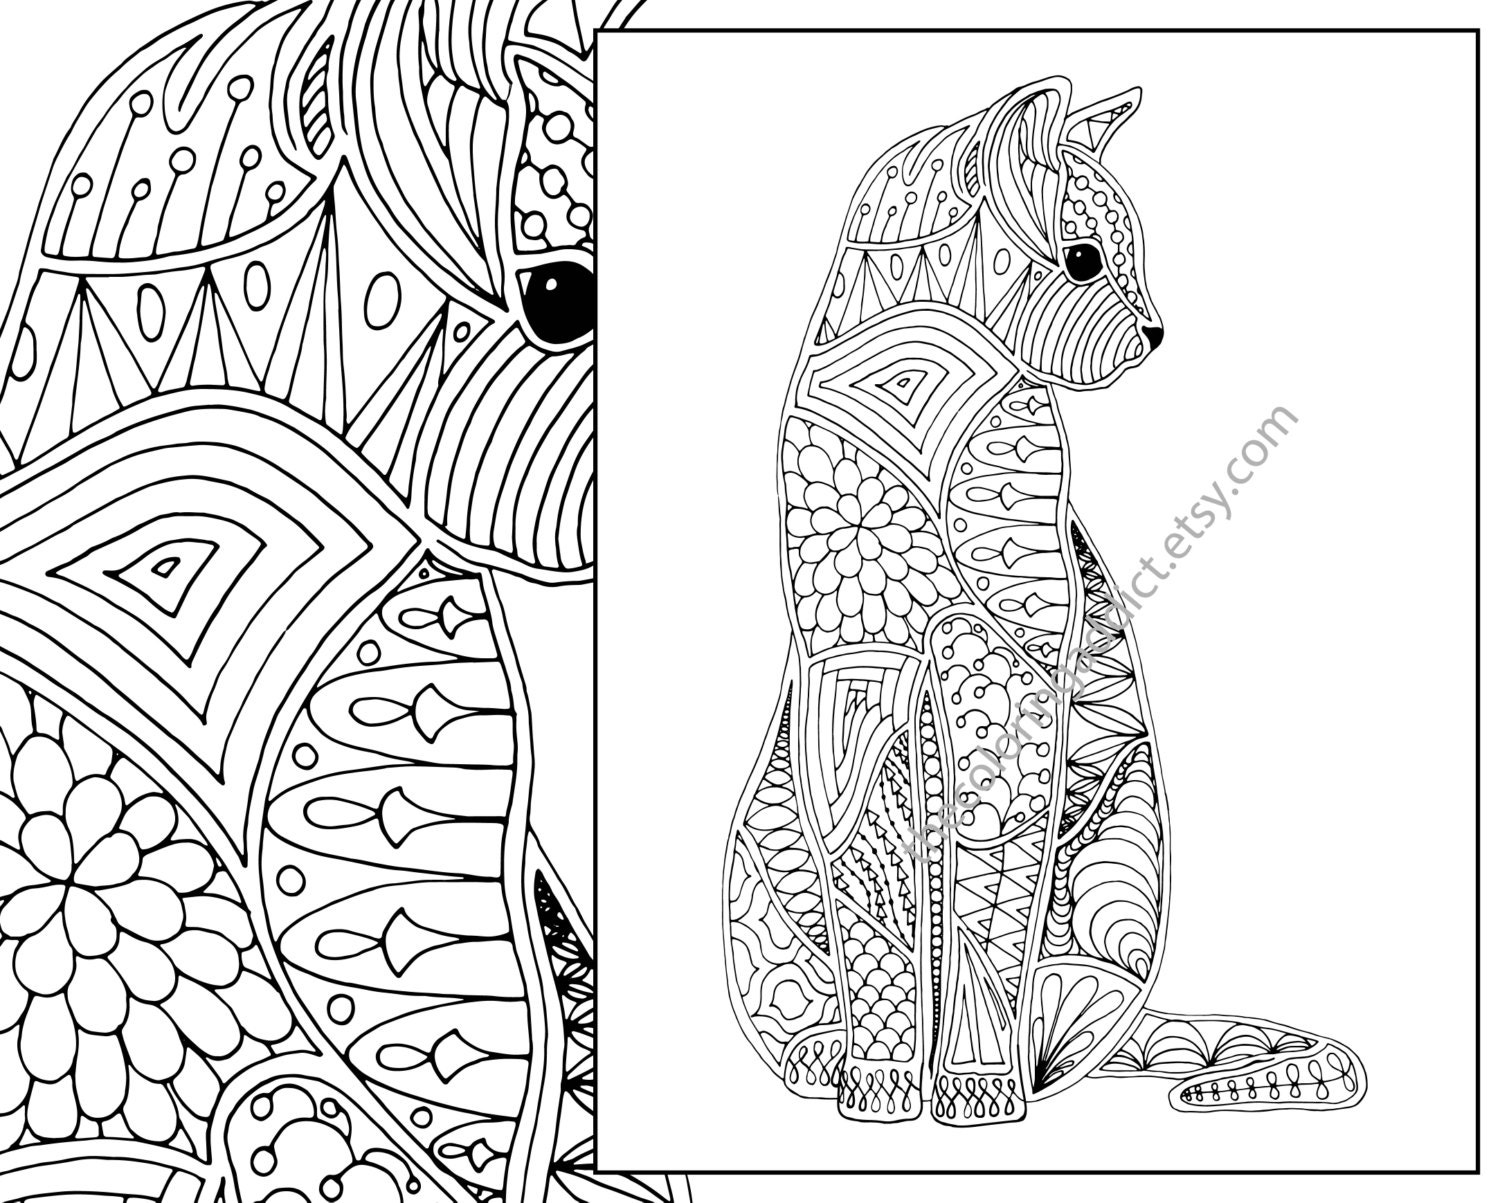 cat coloring  page  advanced  coloring  page  adult  coloring  Etsy